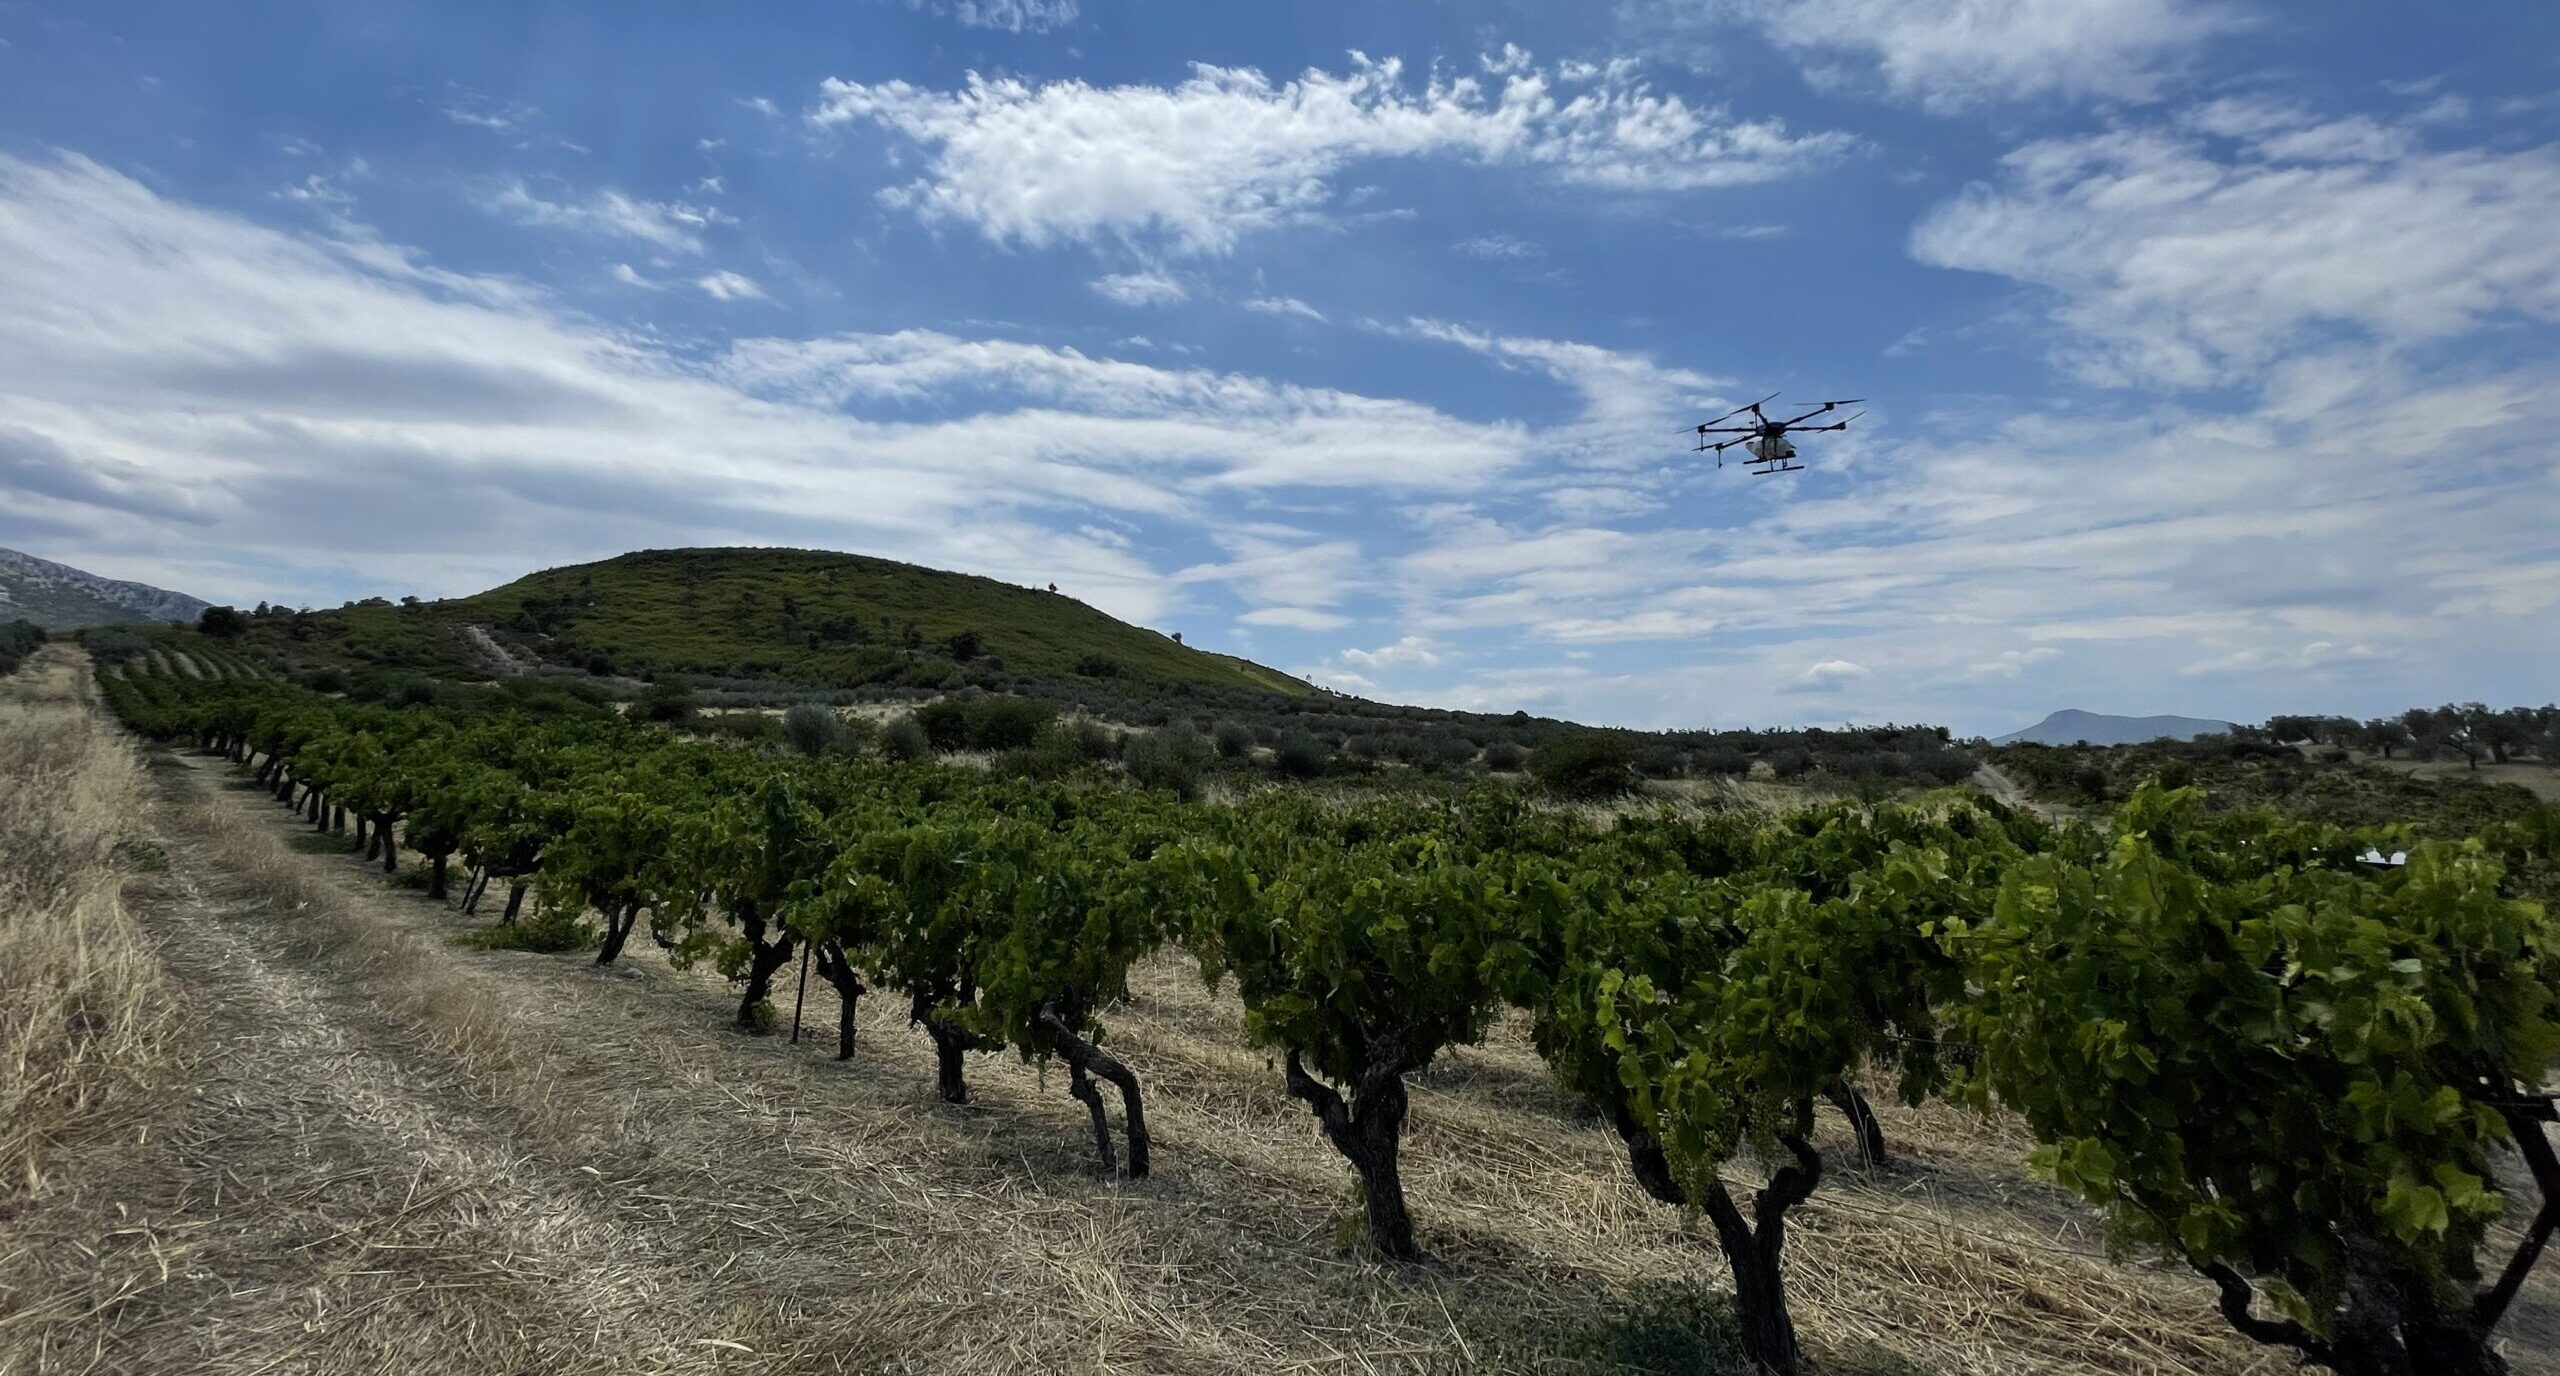 The use of agricultural drones in Cyprus is at a low level